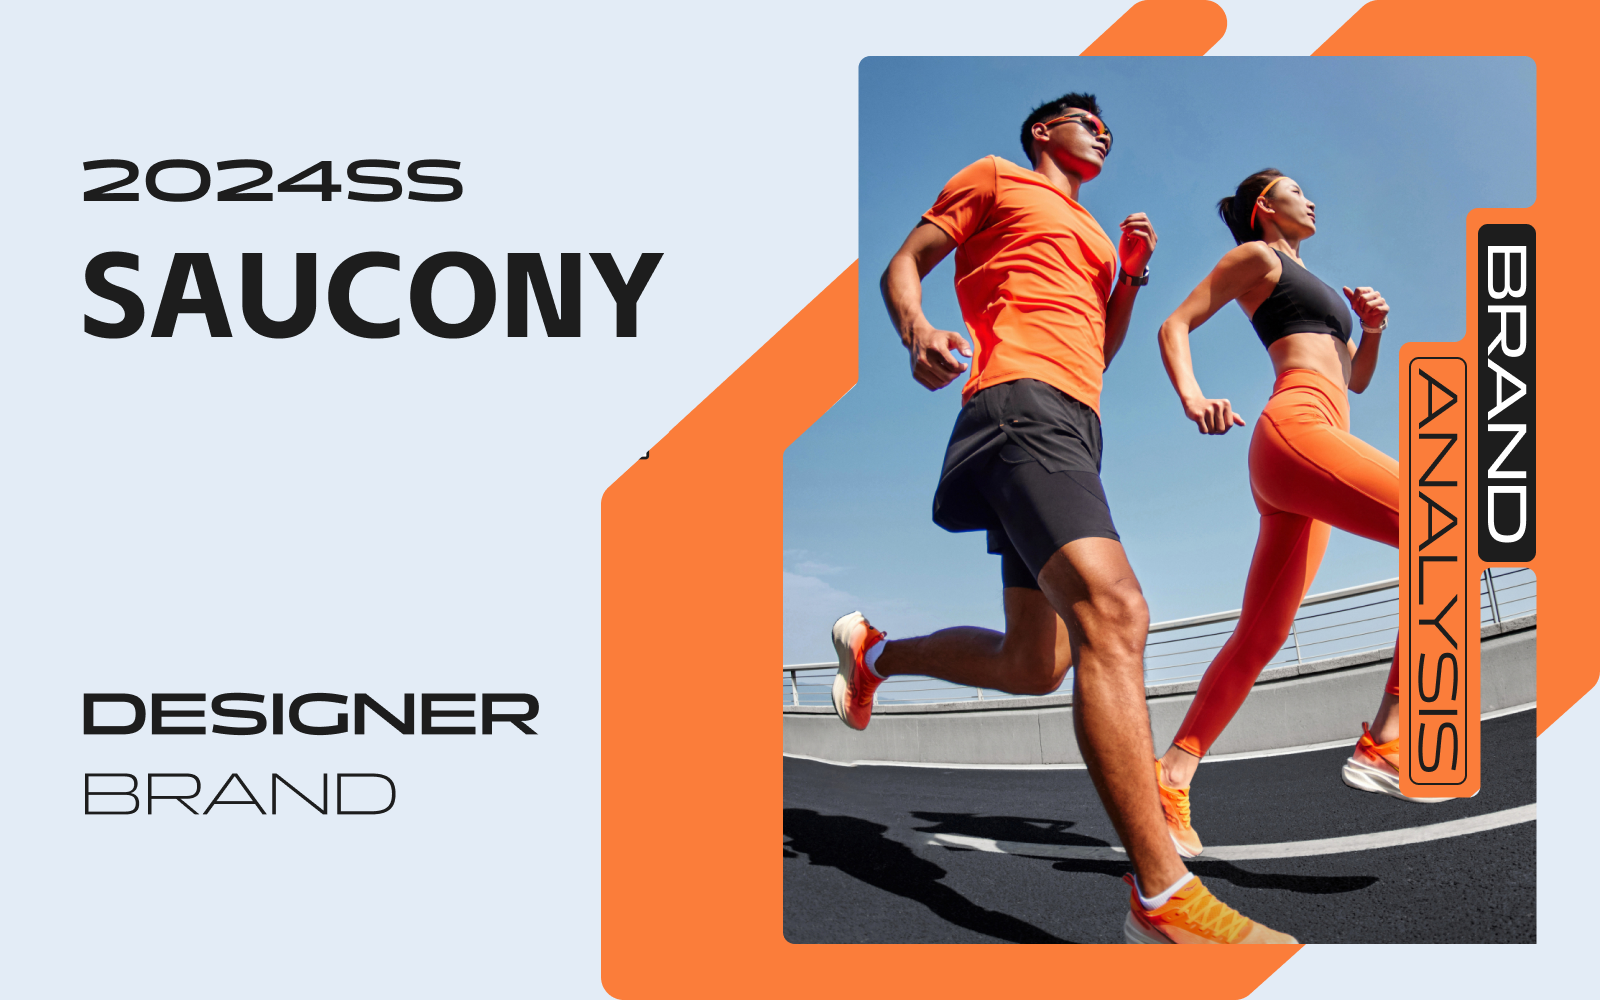 Running on the Track -- The Analysis of Saucony The Sportswear Designer Brand